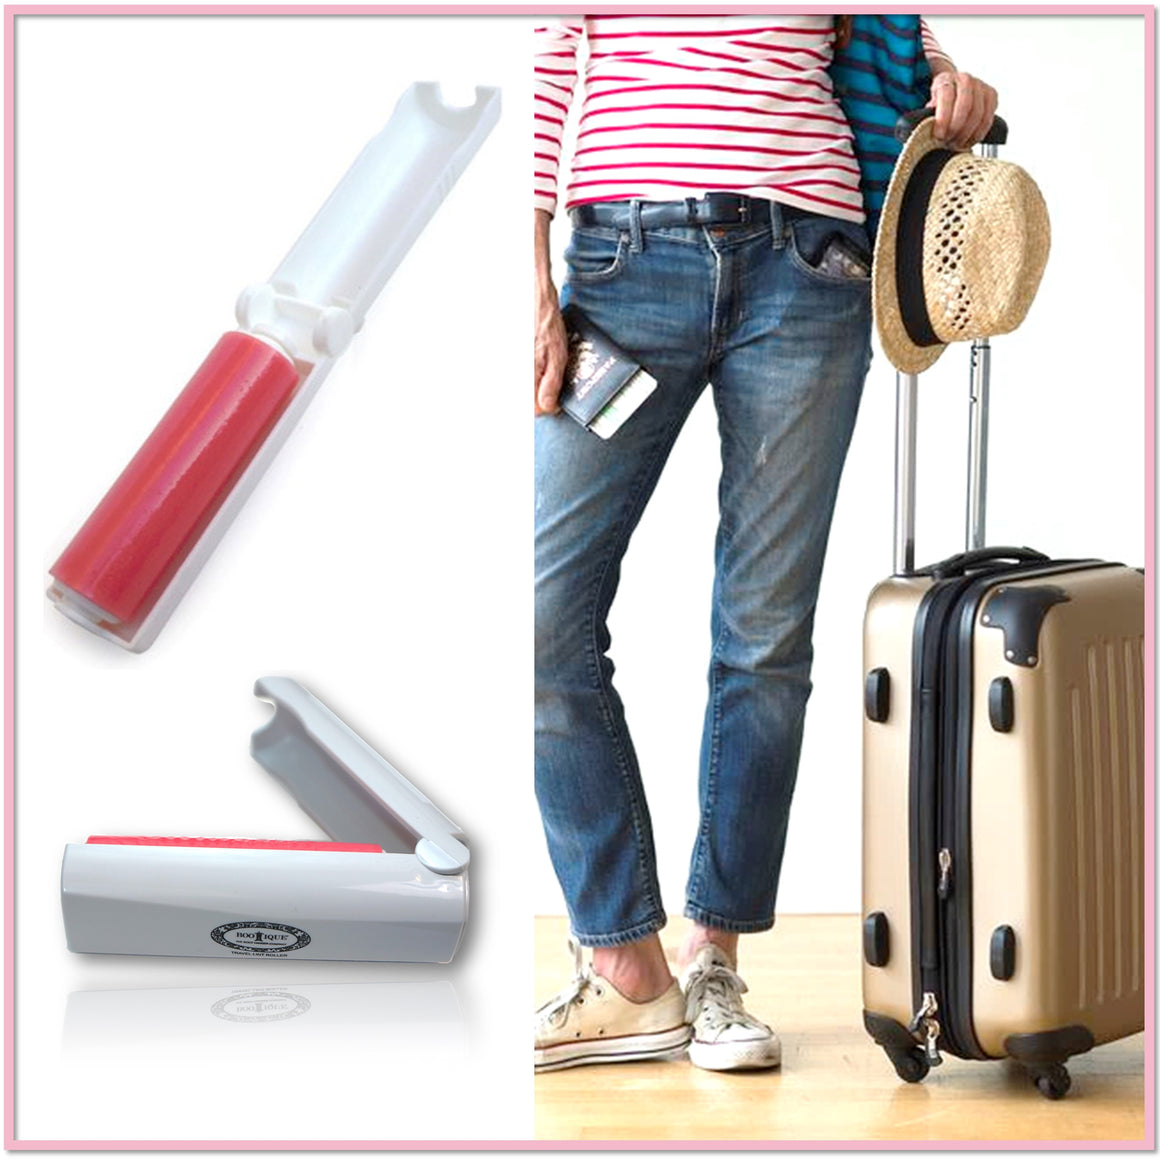 The Travel Lint Roller™ - Amazon's Choice - Boottique